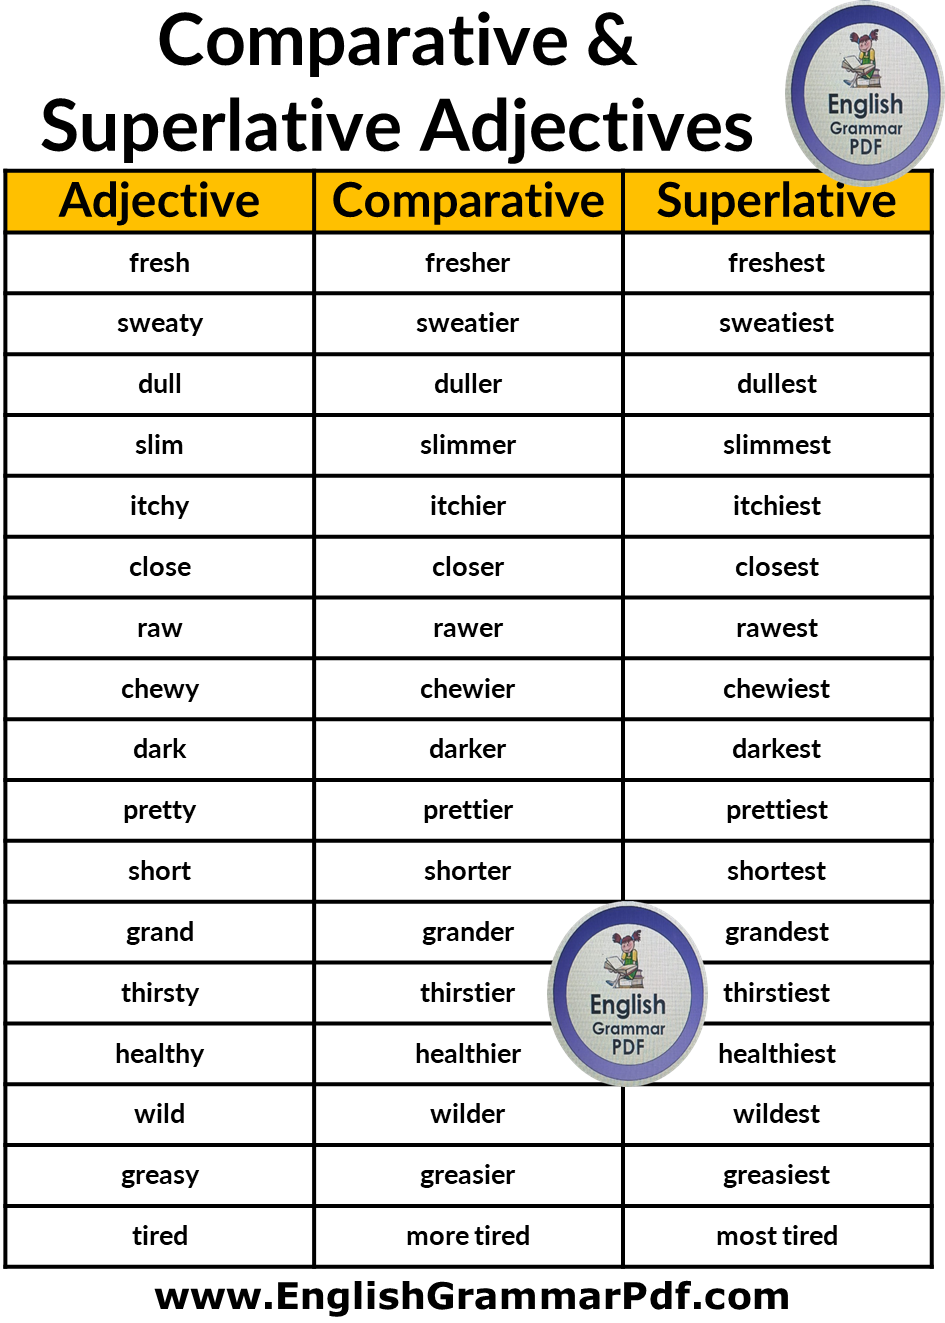 Comparative and Superlative Adjectives in English